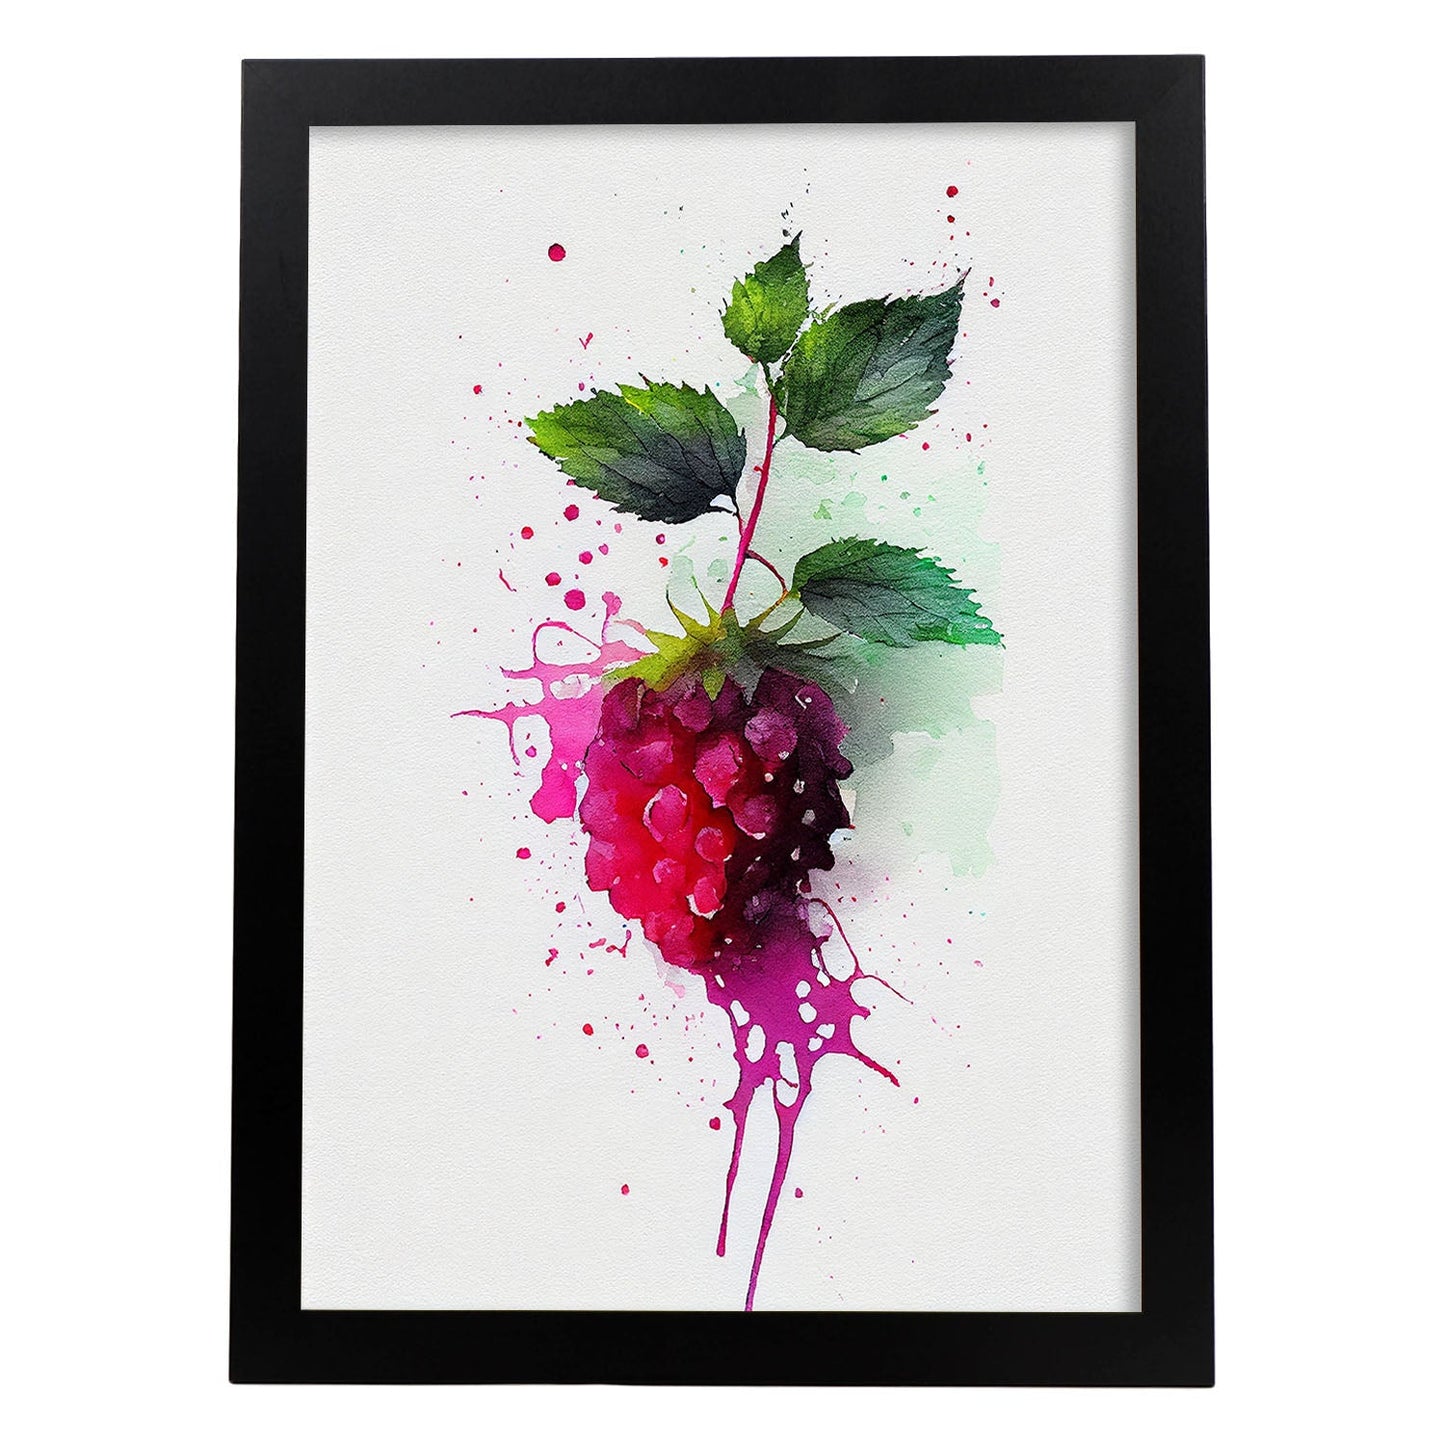 Nacnic minimalist Loganberry. Aesthetic Wall Art Prints for Bedroom or Living Room Design.